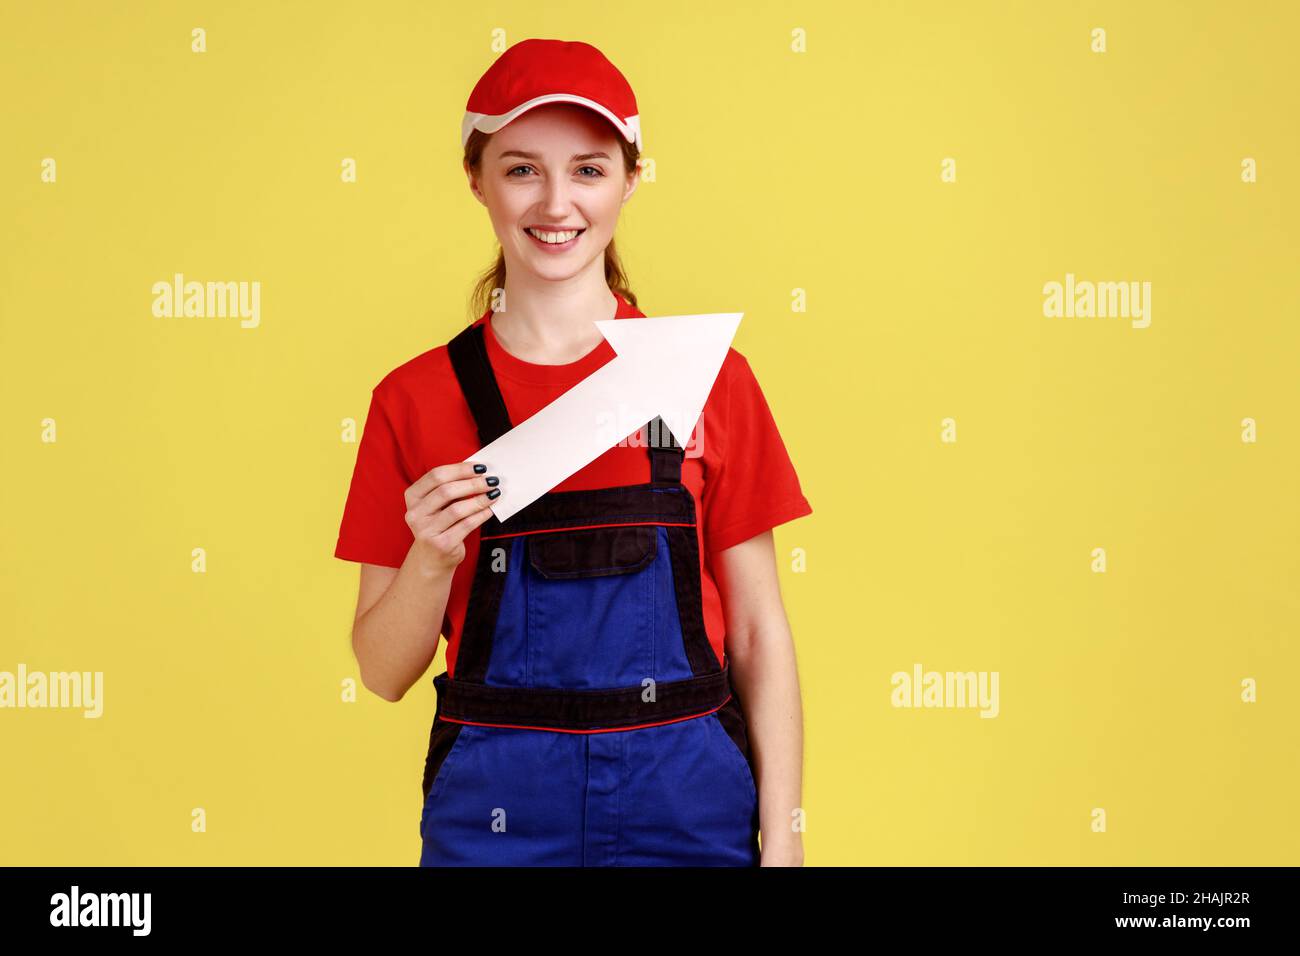 Portrait of smiling positive craftswoman standing with white arrow in hands indicating aside, looking at camera, wearing overalls and red cap. Indoor studio shot isolated on yellow background. Stock Photo